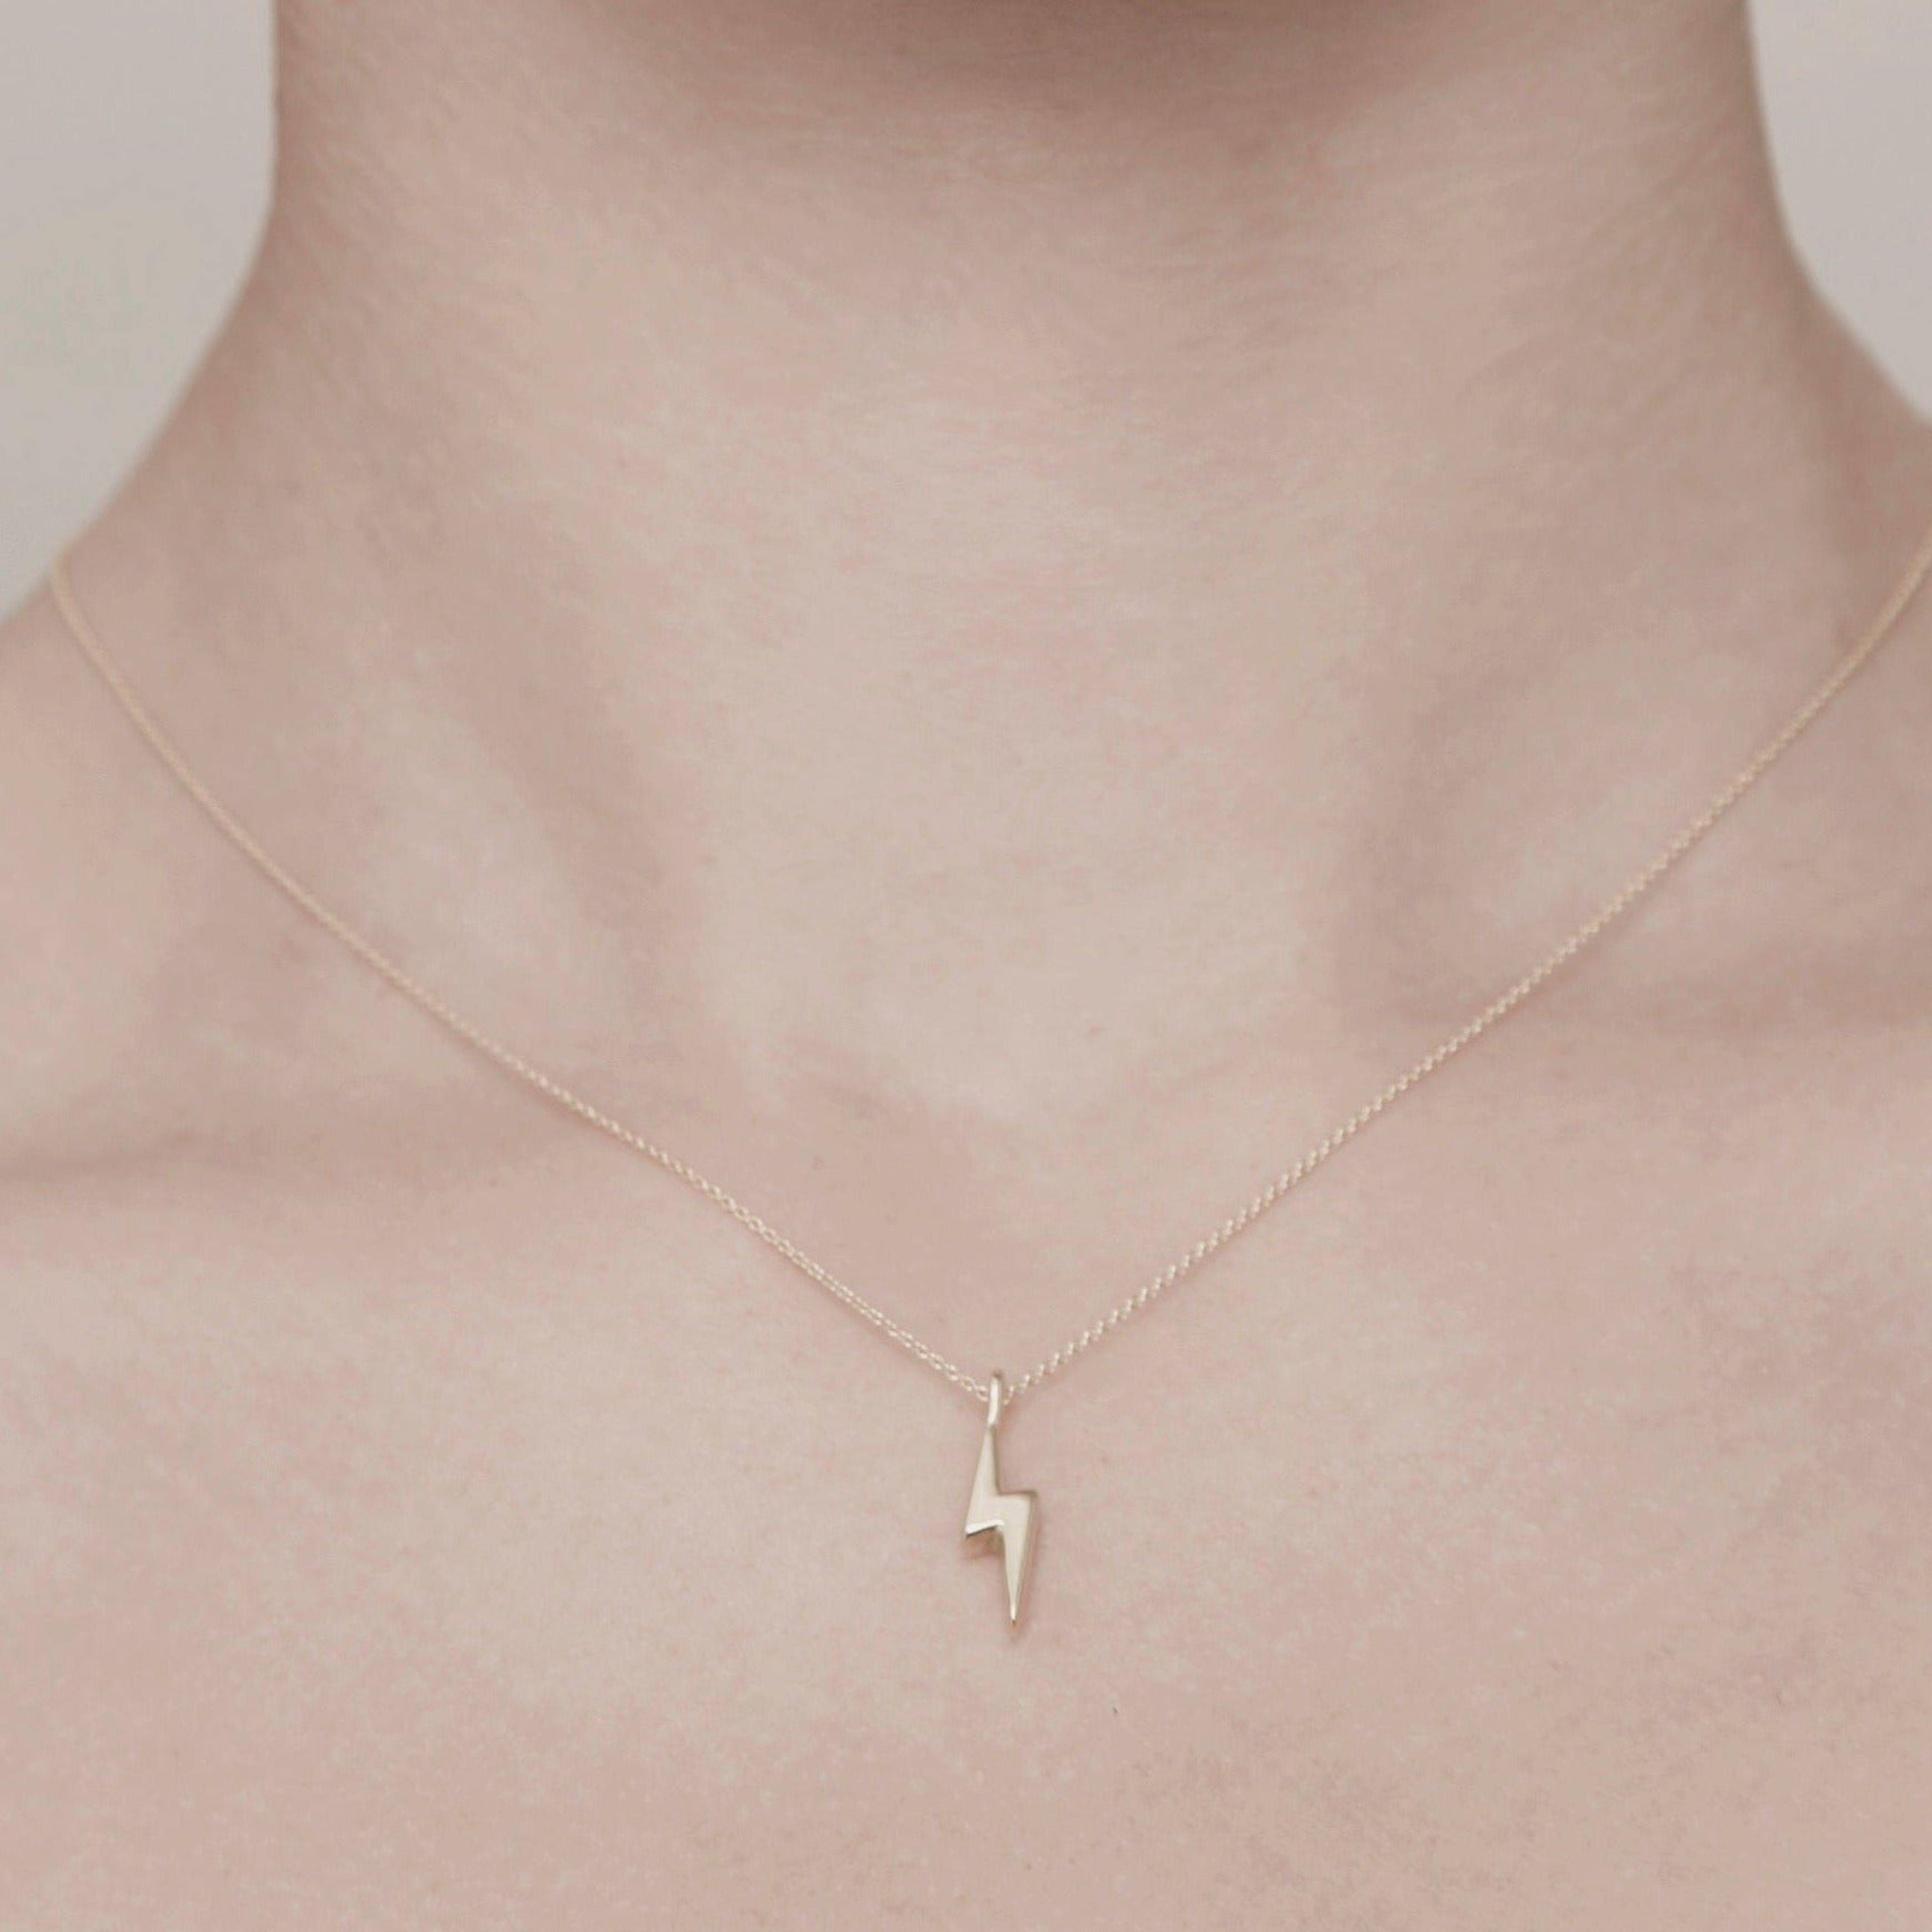 Baby Bolt, on Chain, 19K Gold